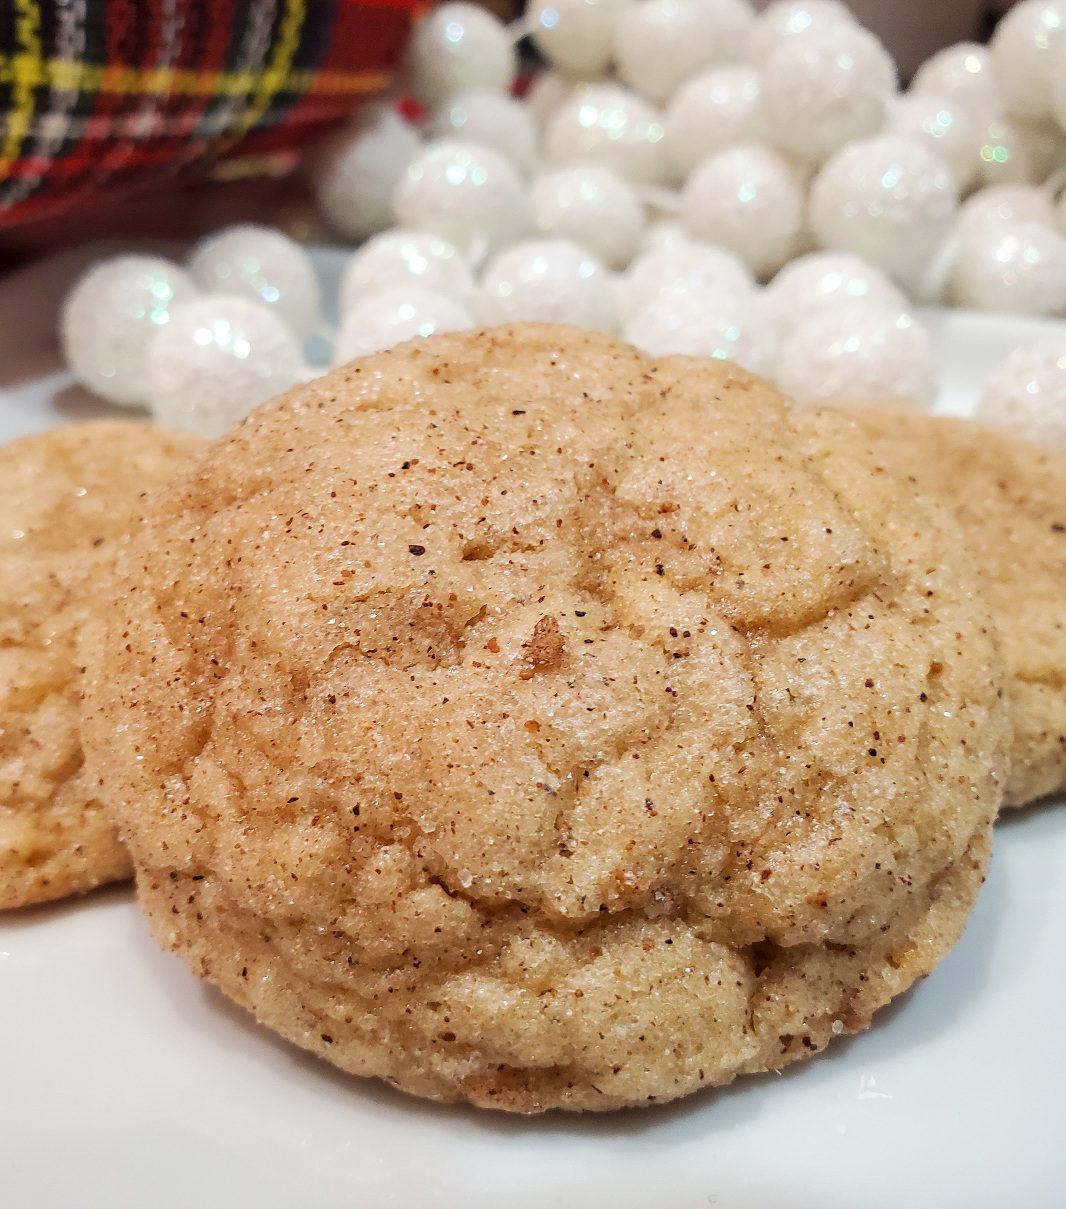 eggnog snickerdoodle cookies from cleveland cooking. Christmas decorations in the background.